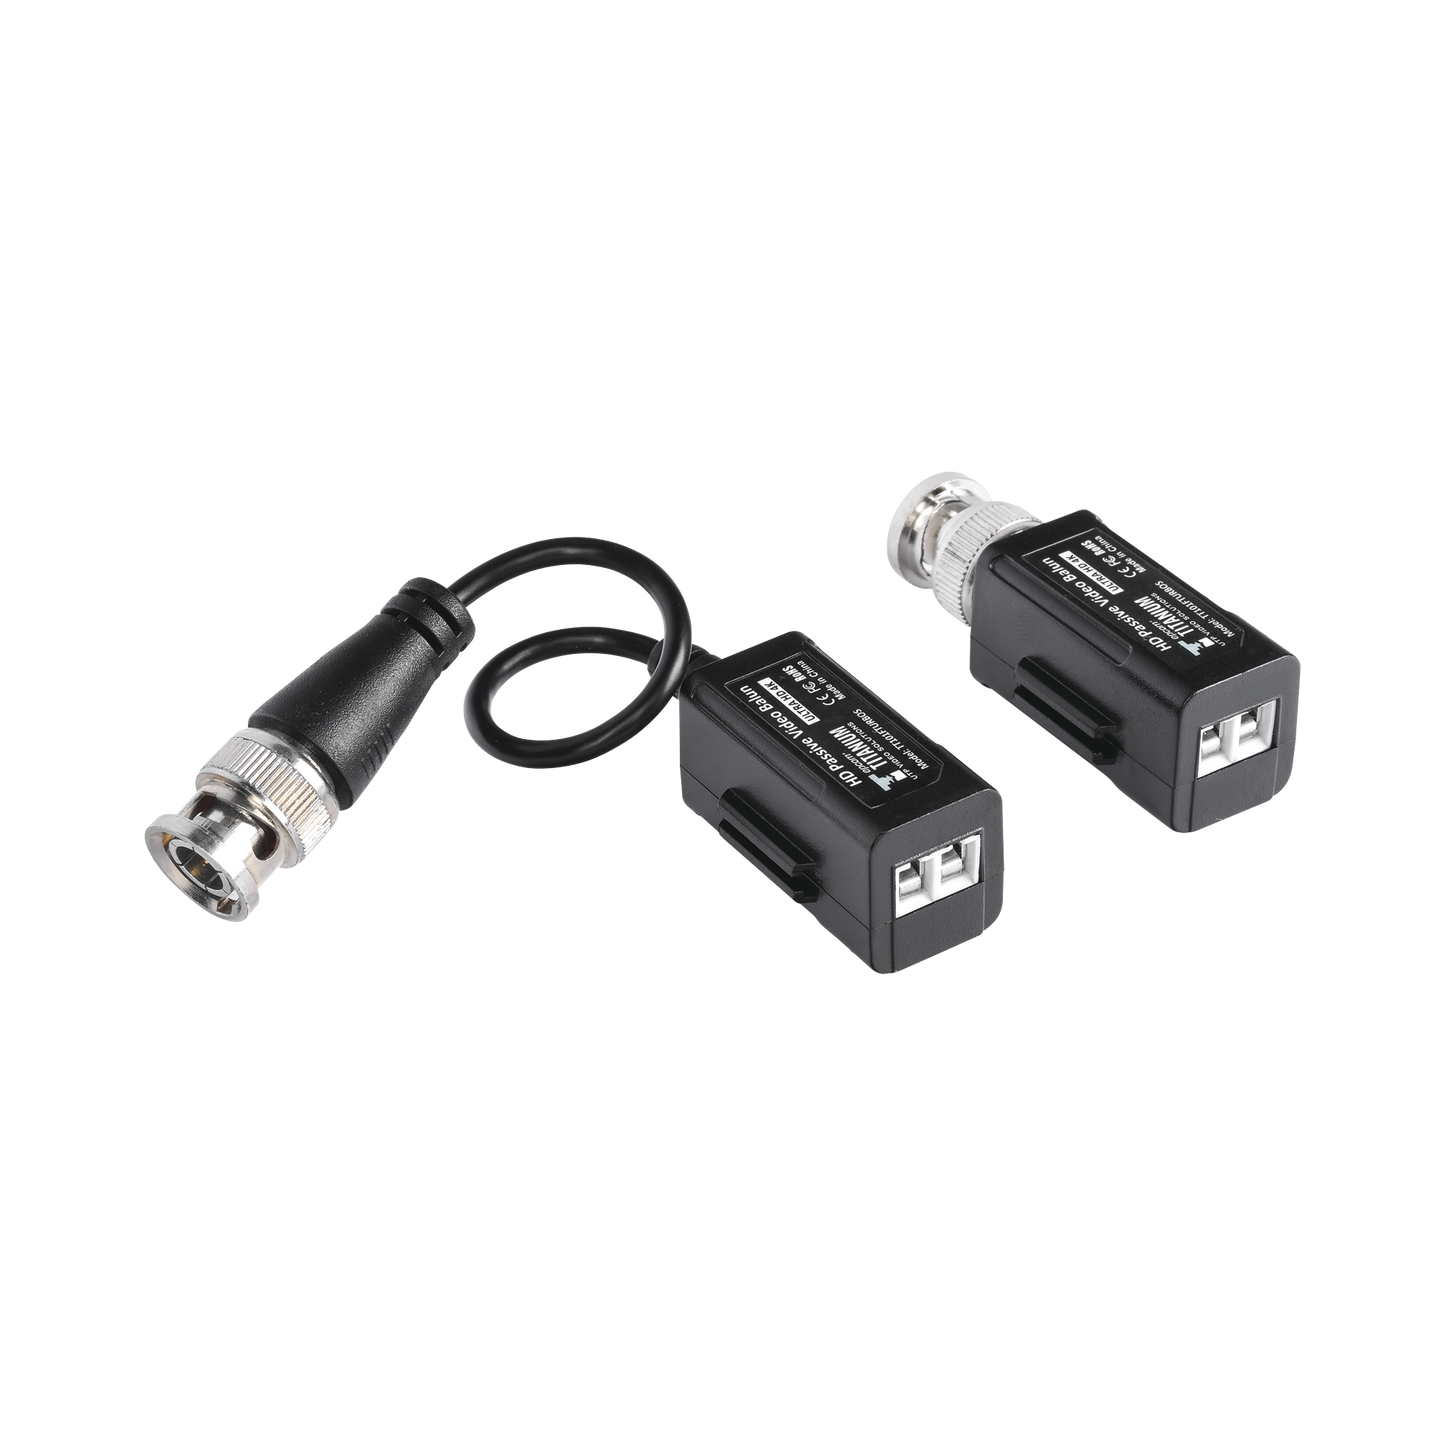 Transceivers Kit (Baluns) with SCREW-TYPE TERMINALS, 4K Resolution, Shielded COAXIAL / COAXITRON / AUDIO BY COAXITRON / OSD Menu / 100% COPPER Connector / PREMIUM Quality